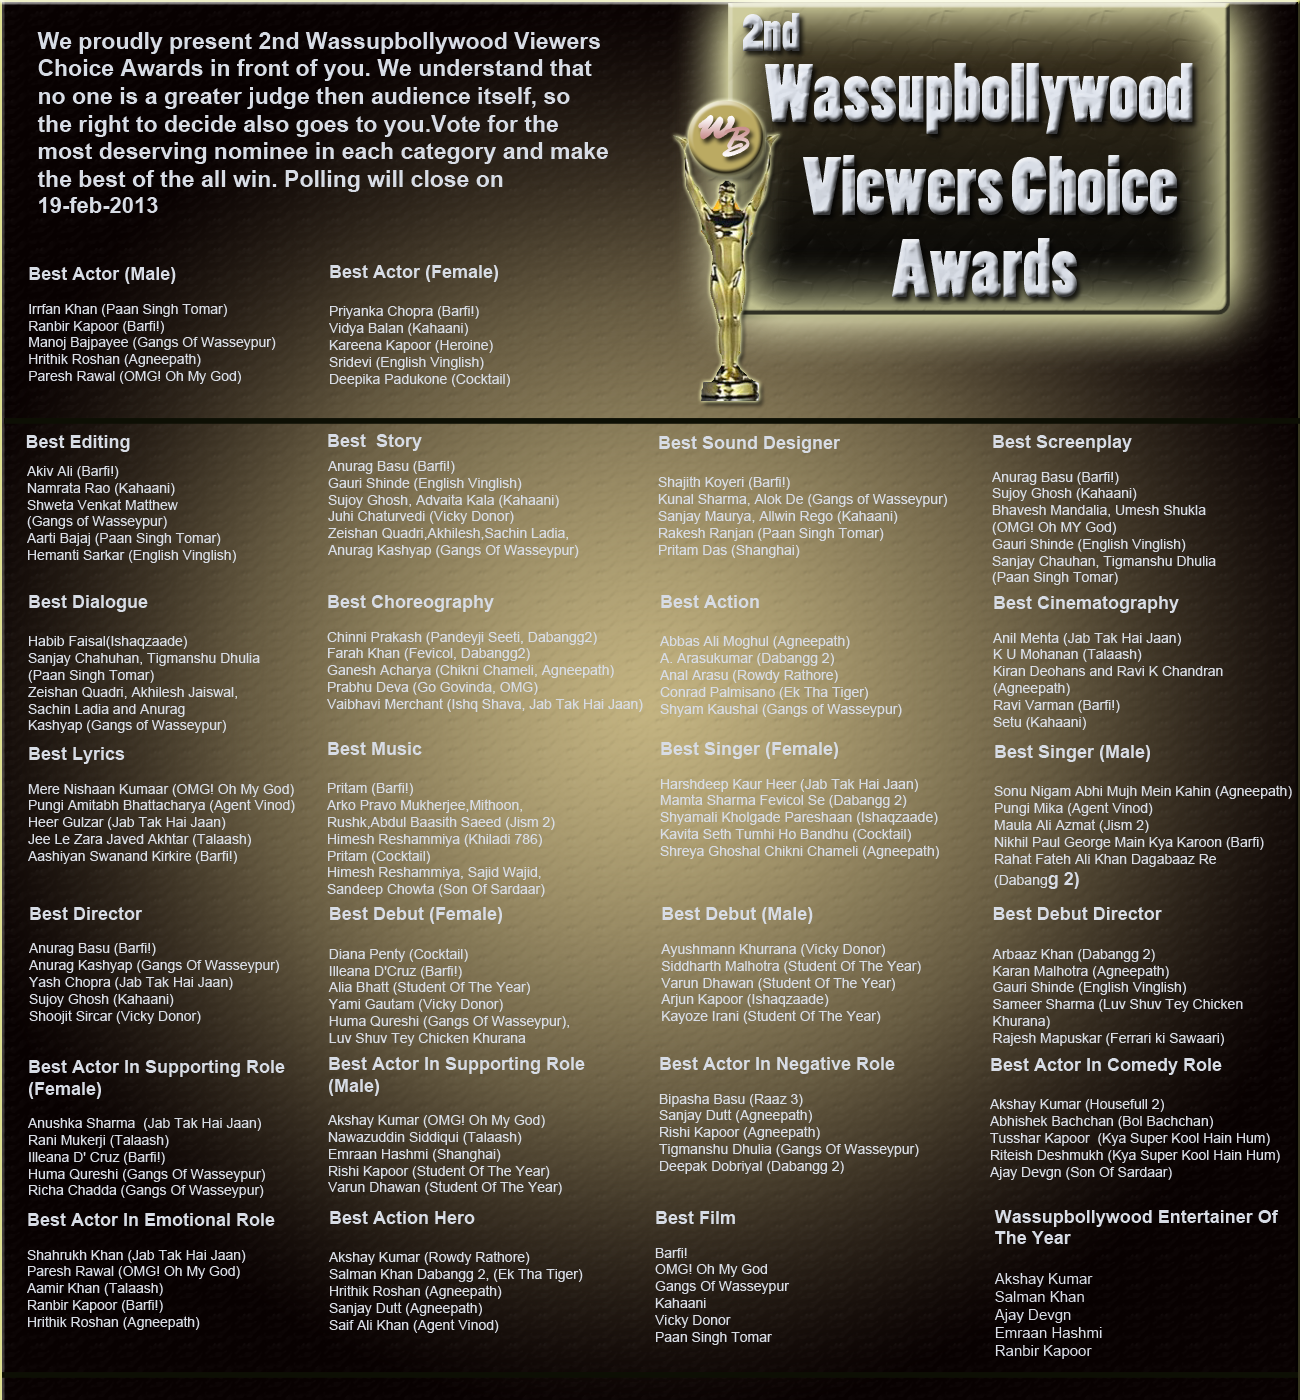 Voting Starts for 2nd Wassupbollywood Viewers Choice Awards